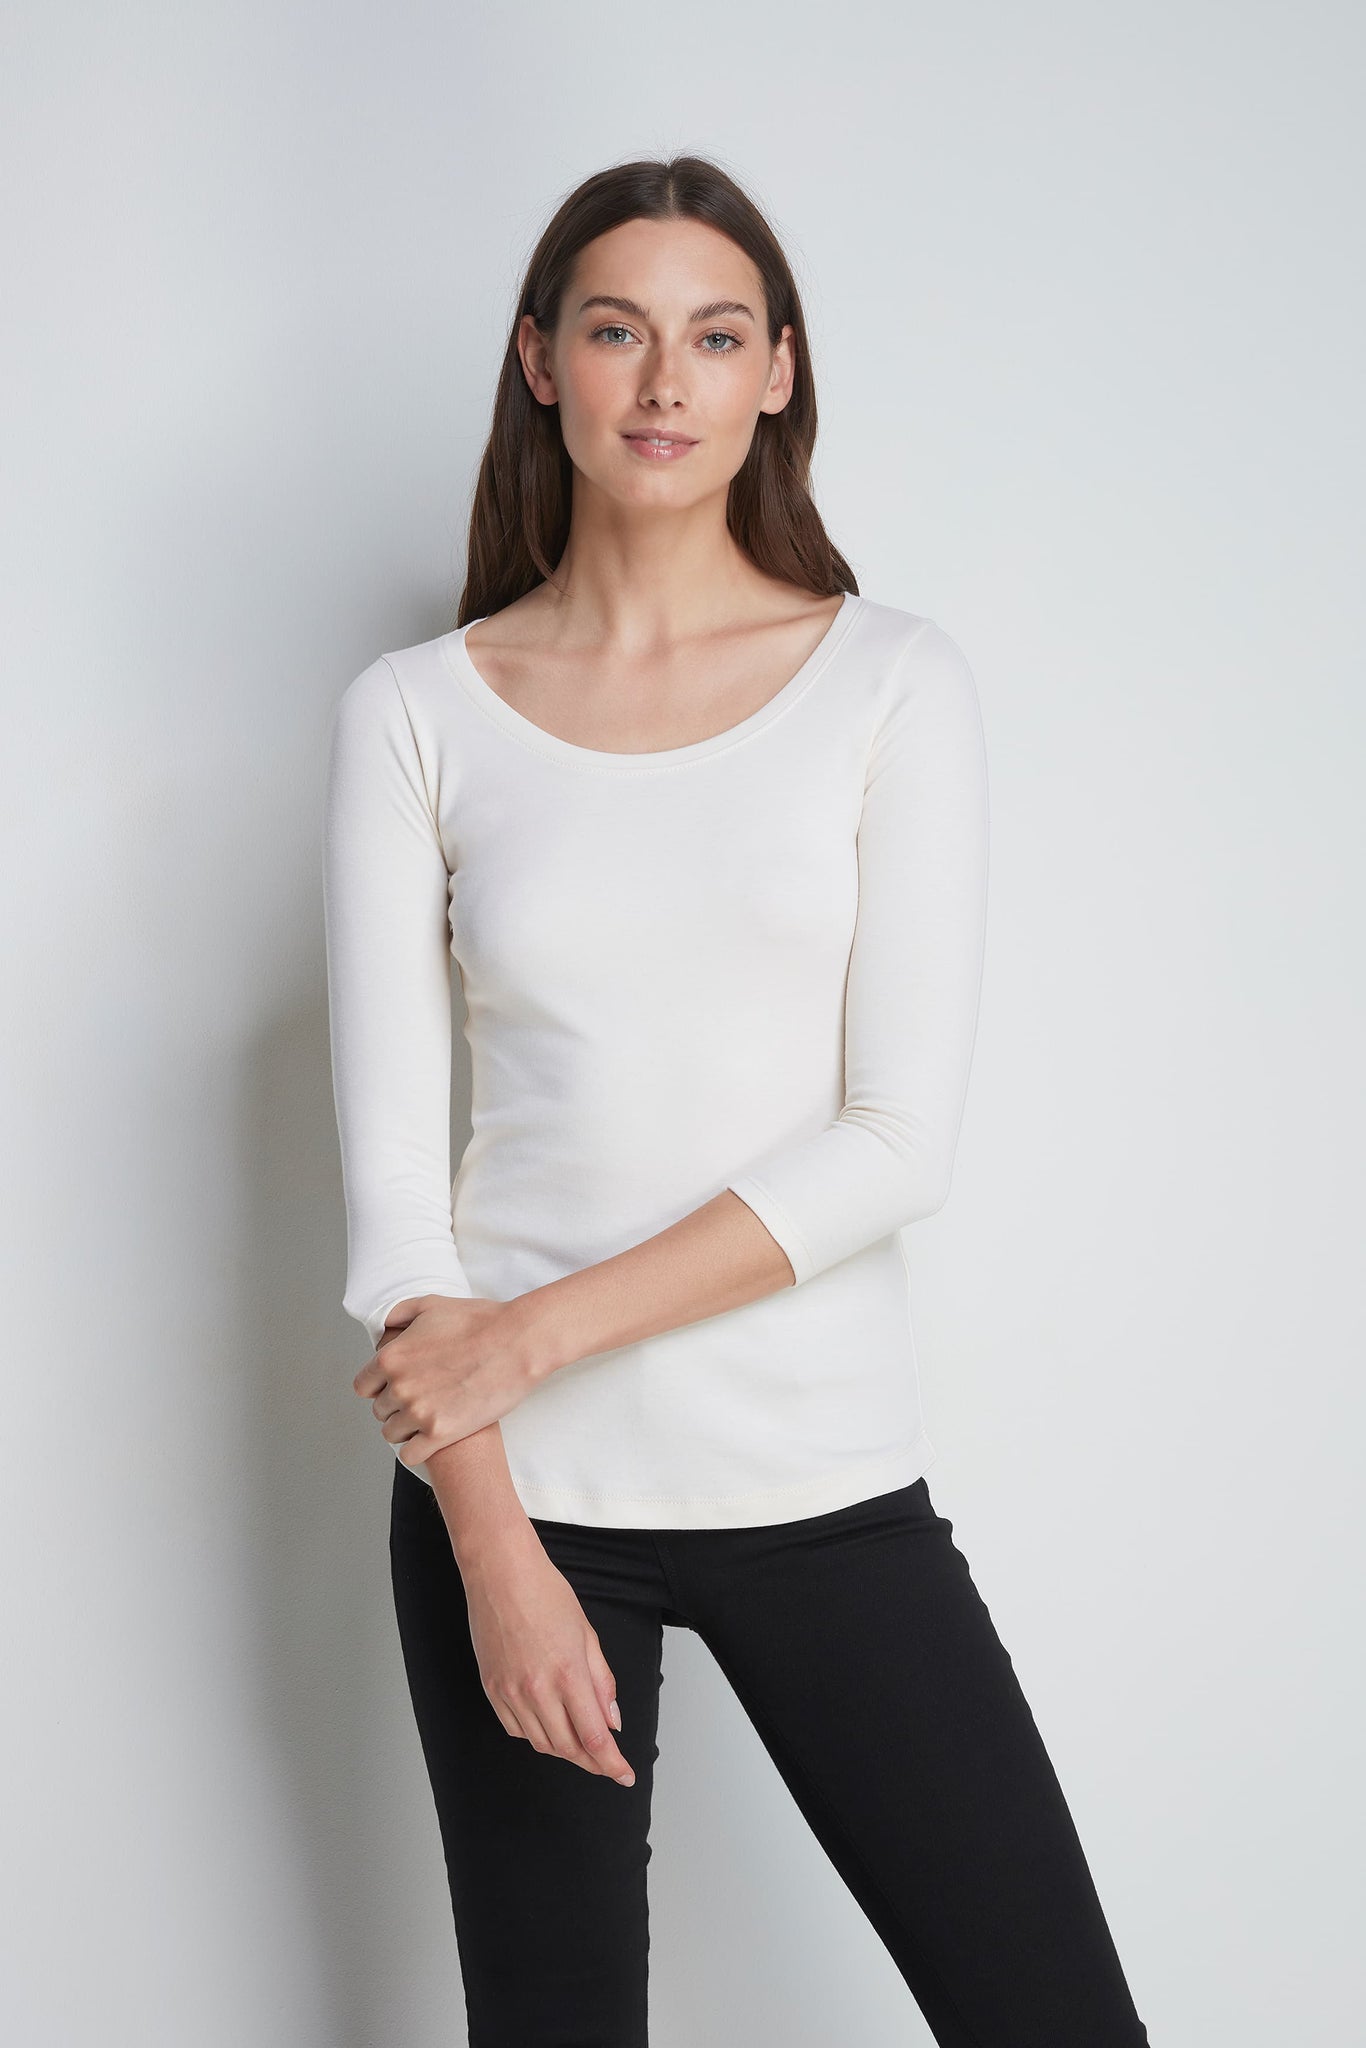 Quality Cotton Jersey 3/4 Sleeve Scoop Neck T-Shirt in White by Lavender Hill Clothing 